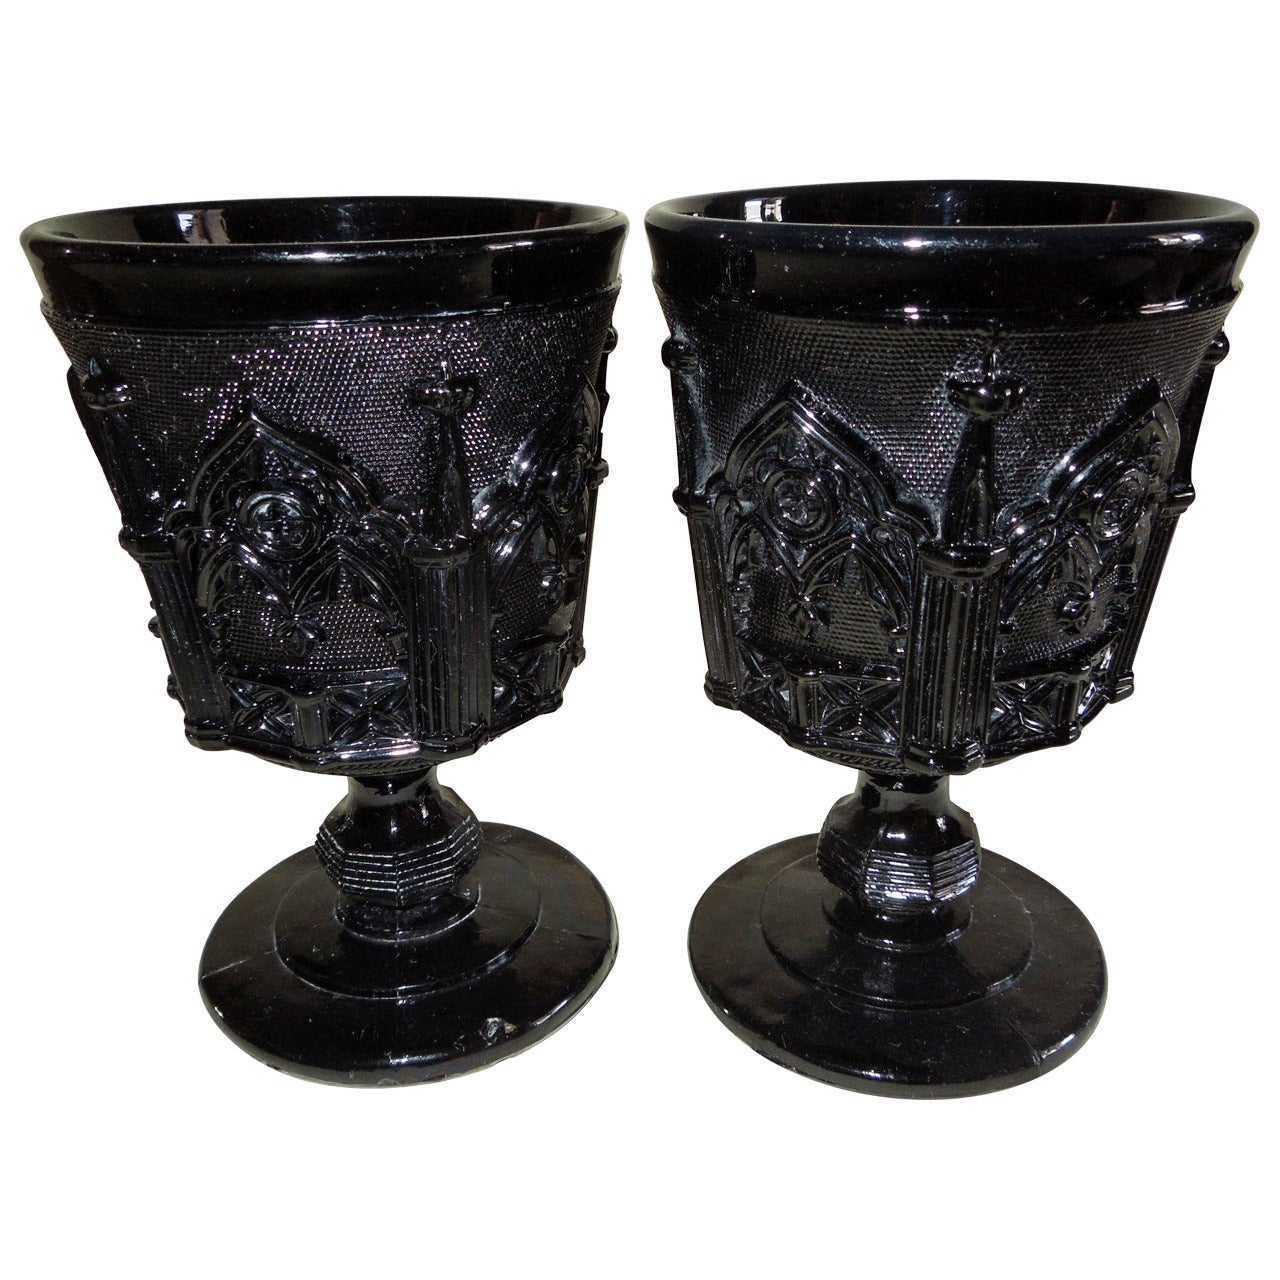 Two Gothic Revival Pressed Opaque Black Glass Goblets, Cristalleries Saint Louis